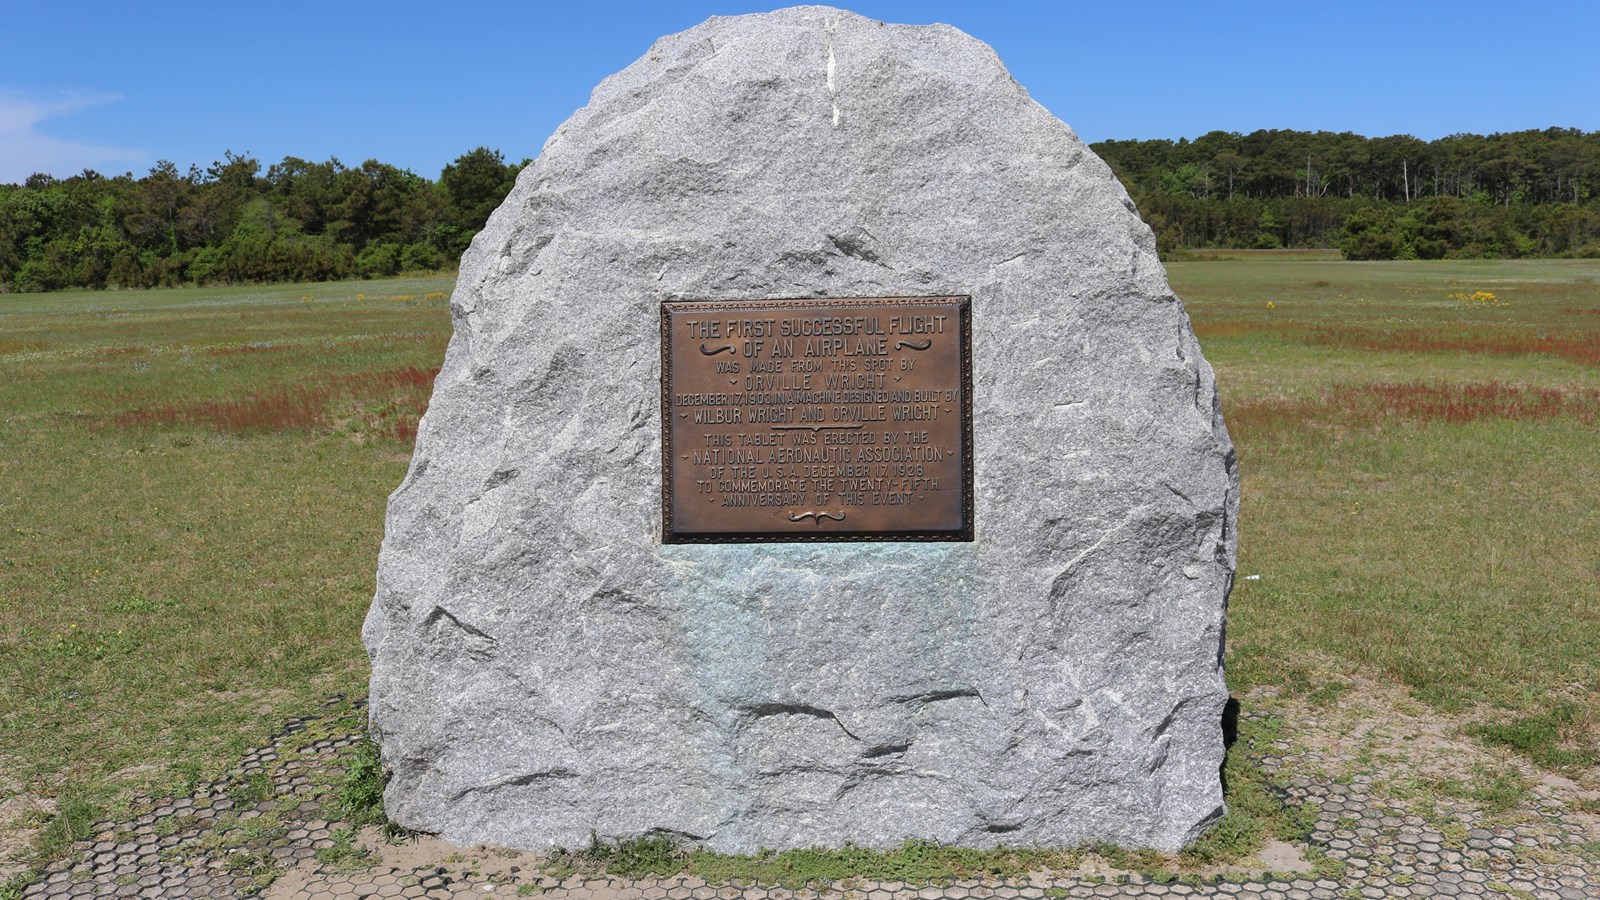 A large, granite boulder has a bronze plaque centered in it. 